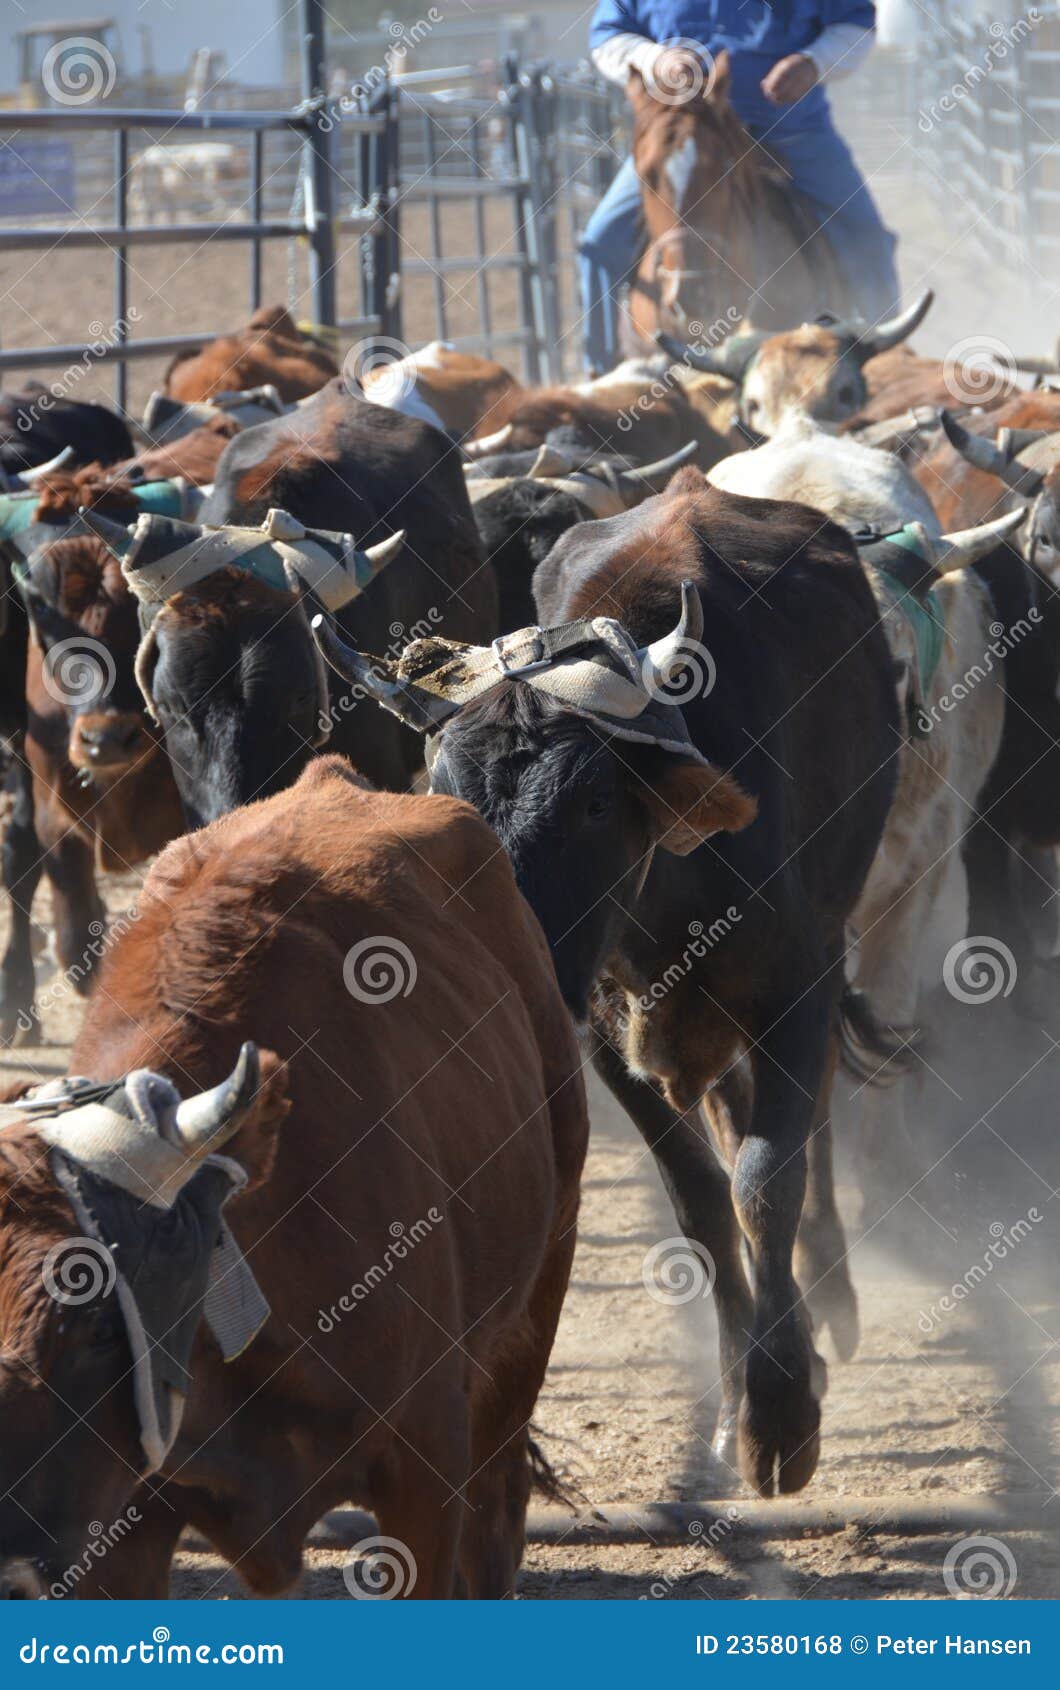 cows in the cattle